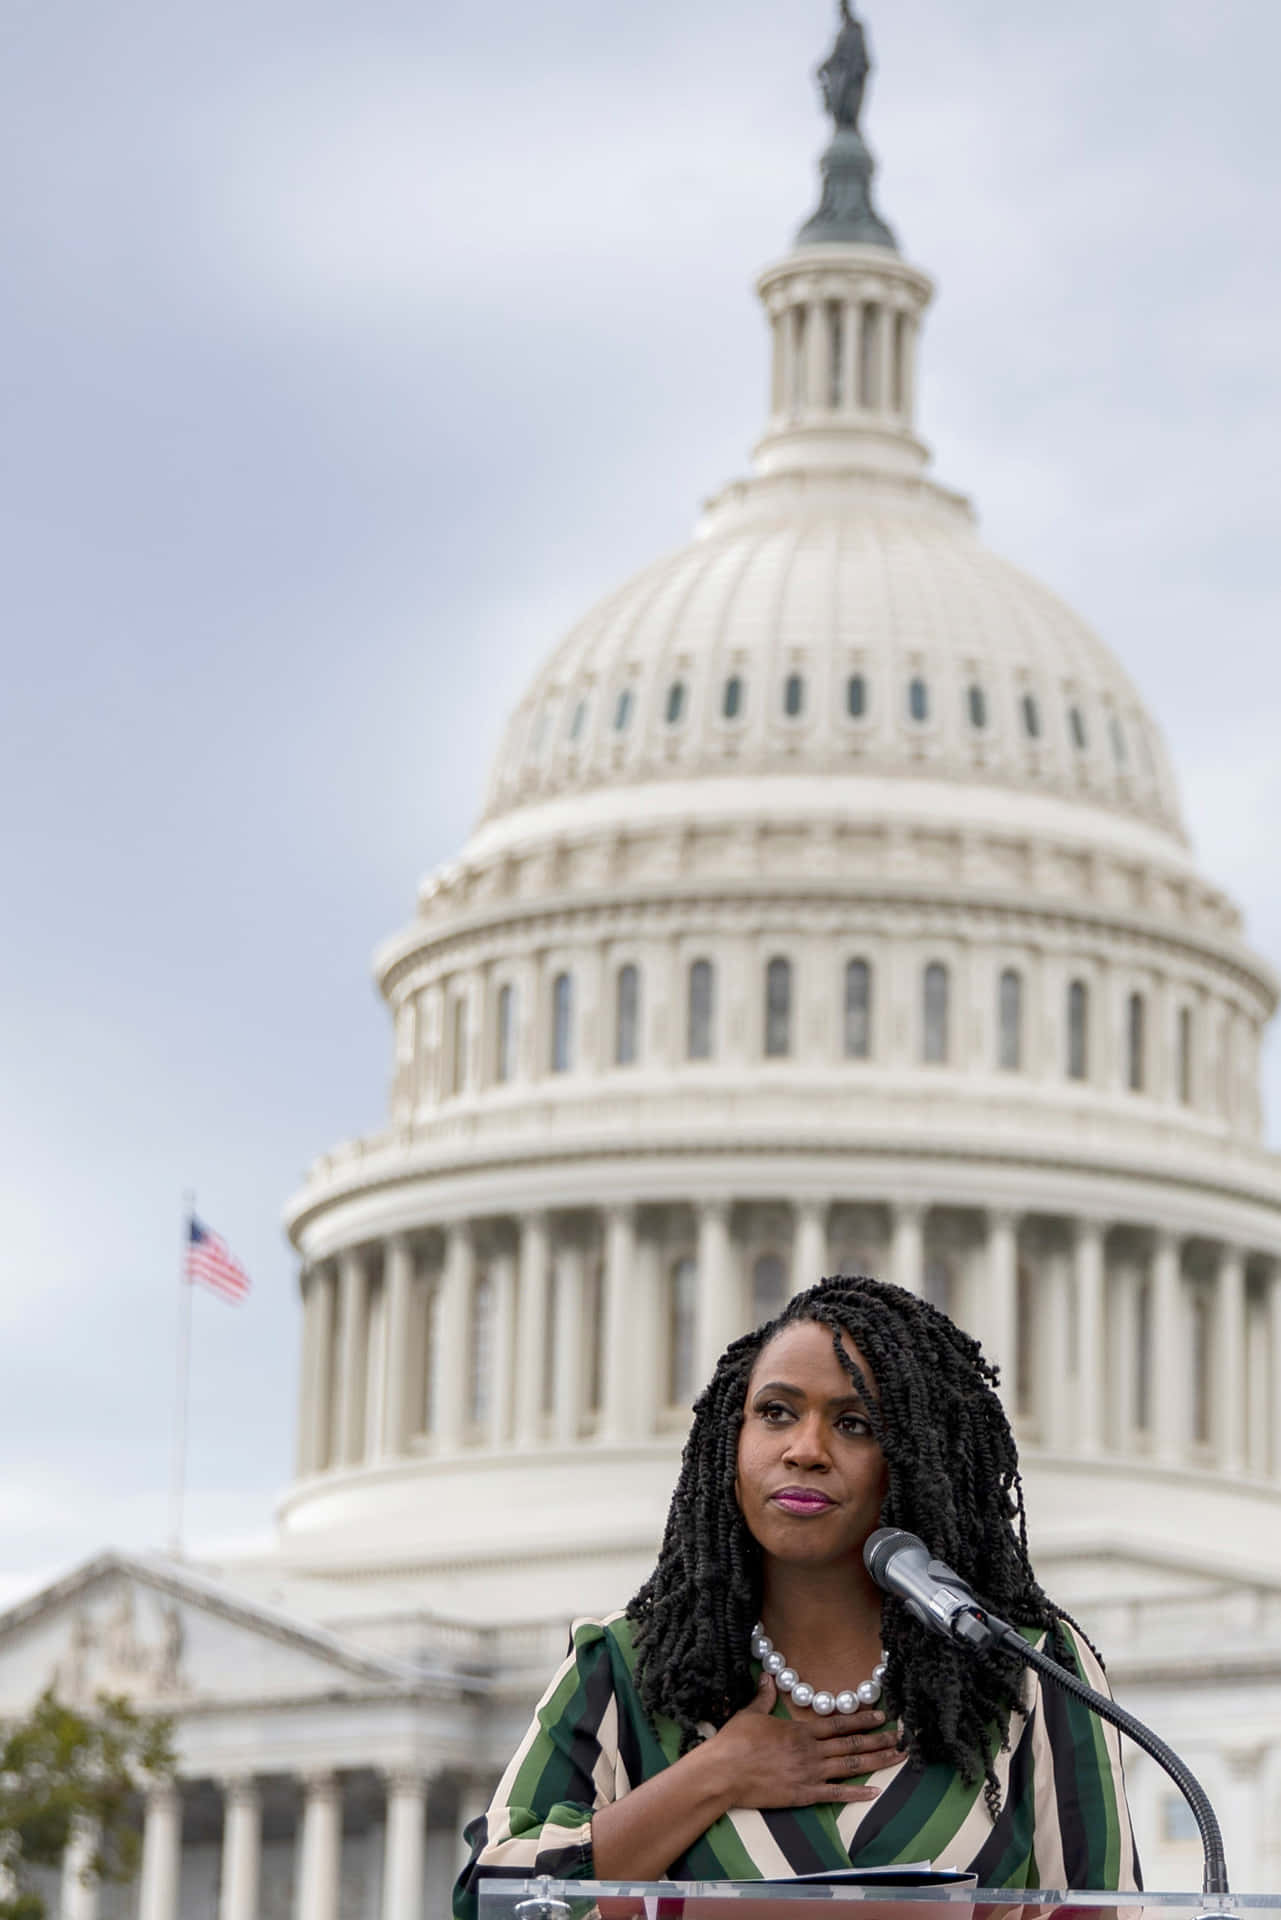 Ayanna Pressley, Speaking Passionately at a Capitol Event Wallpaper